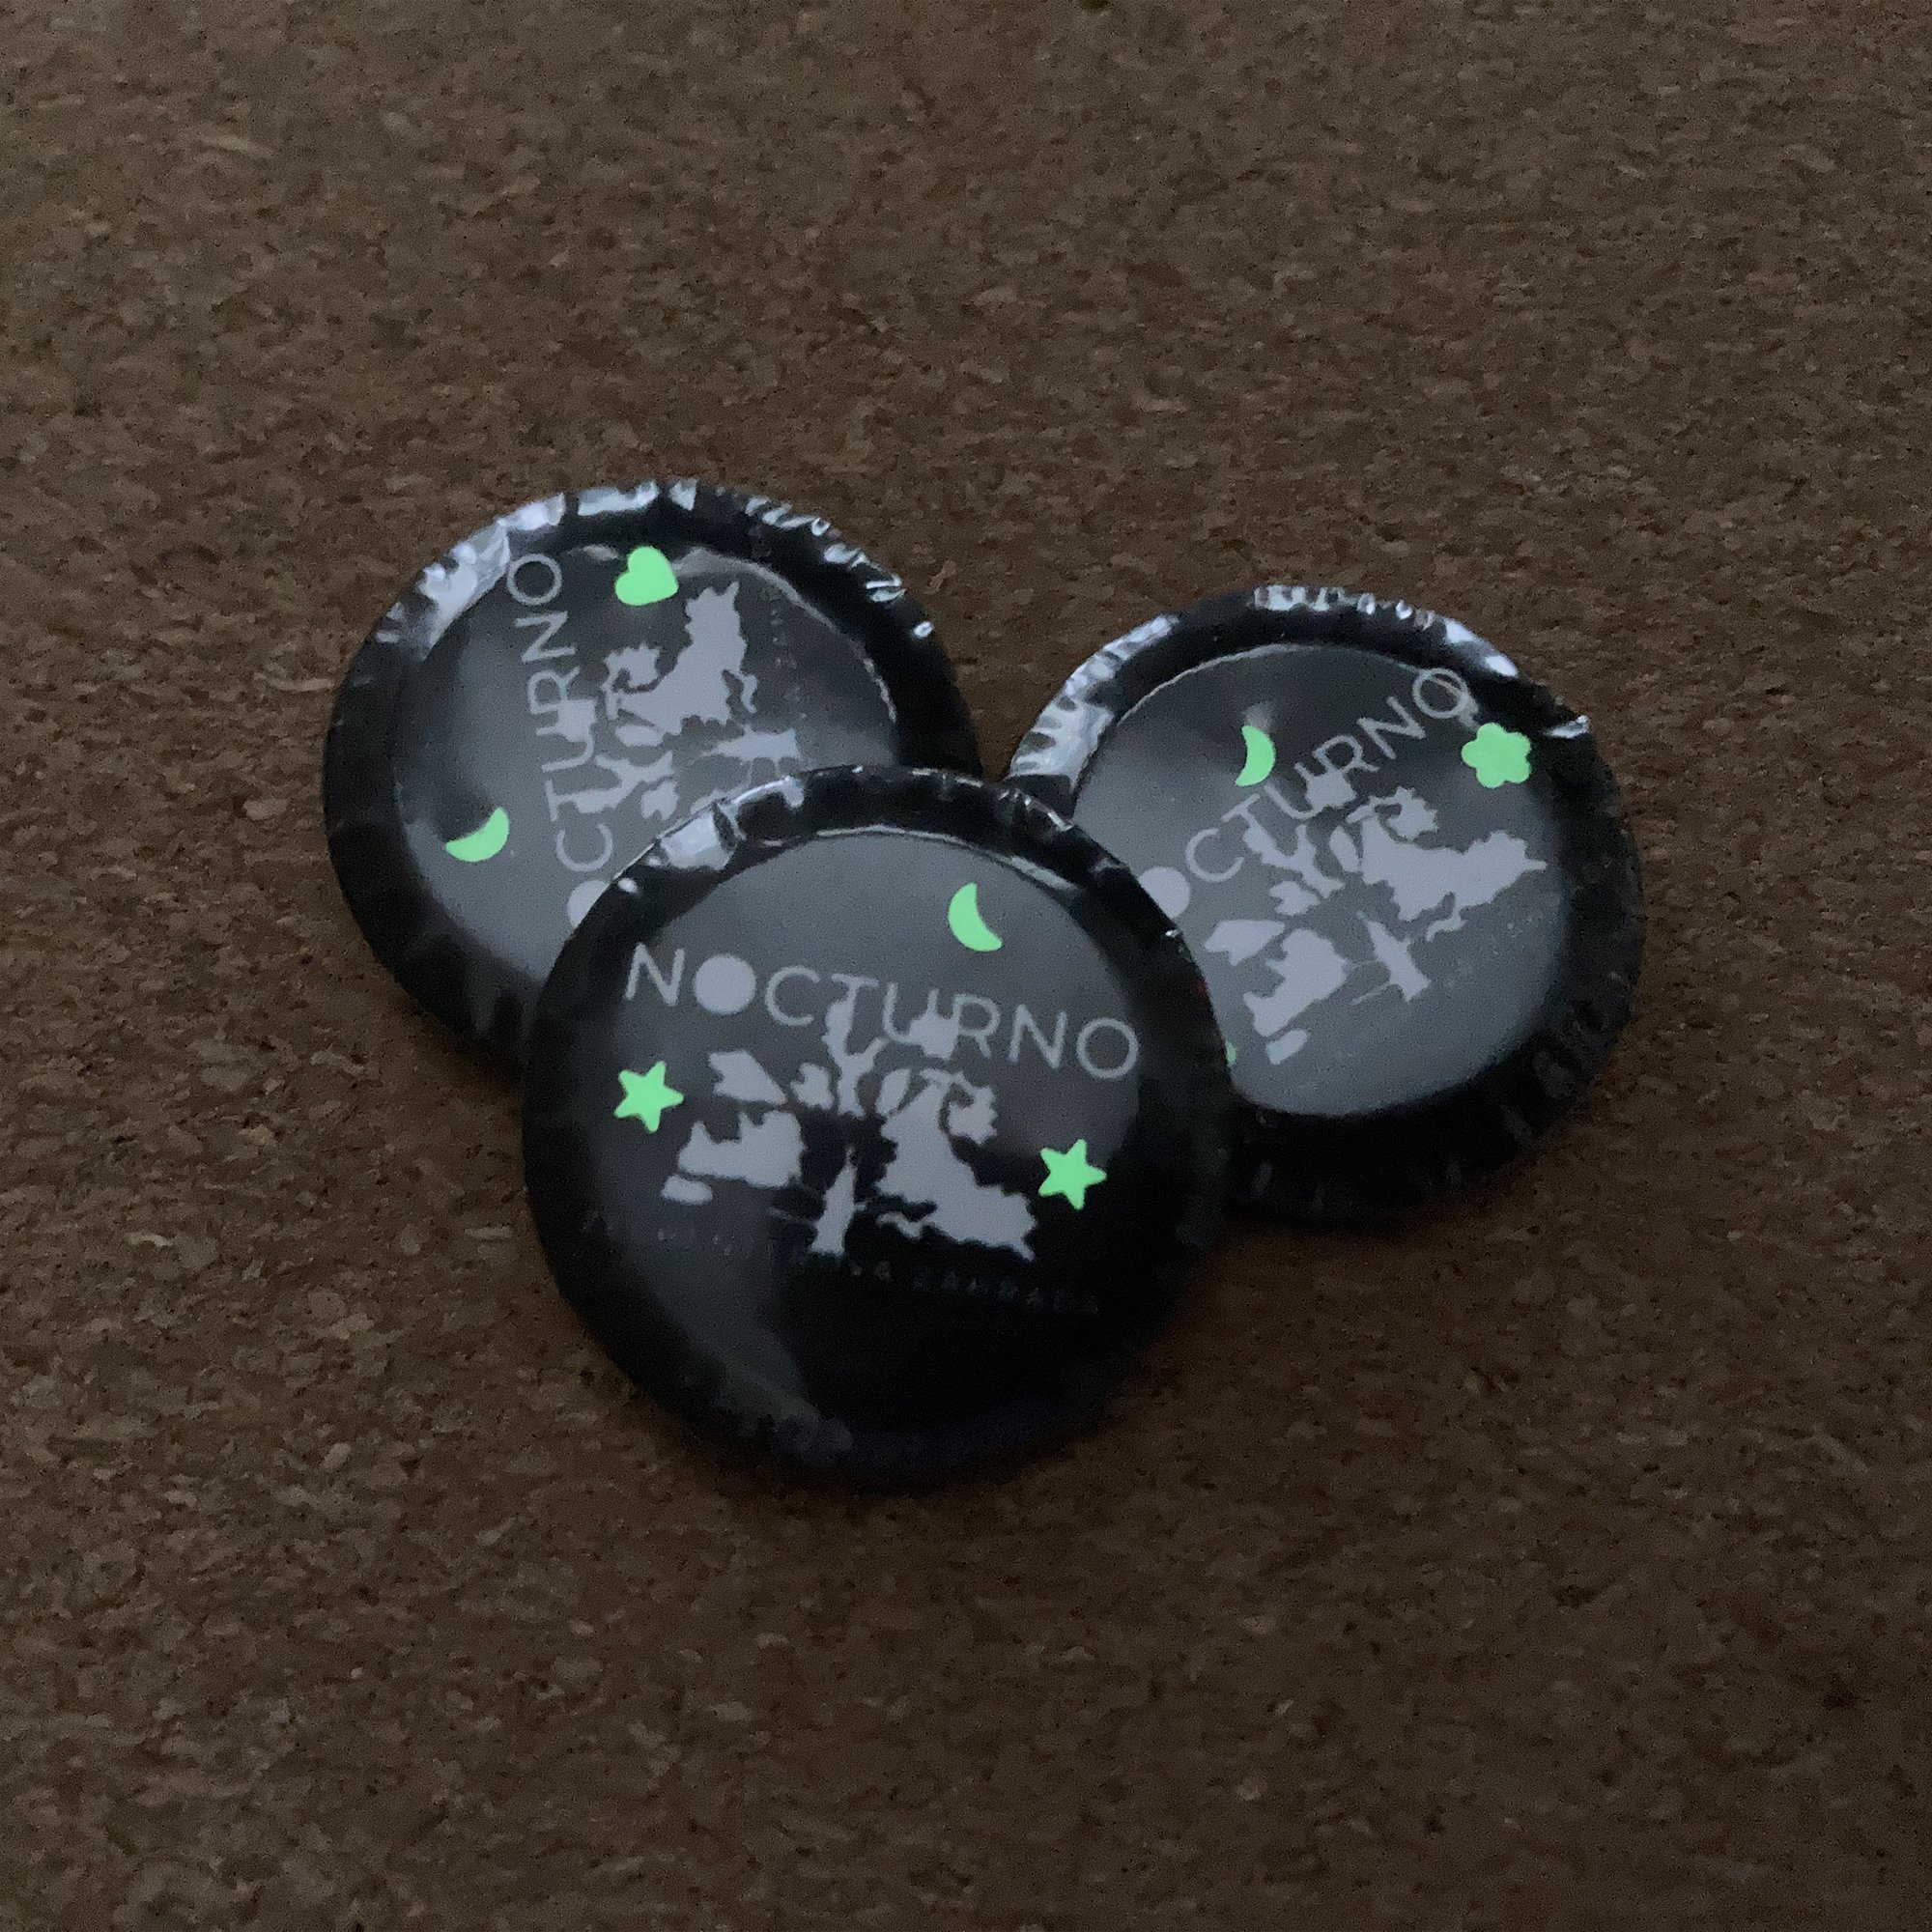 Buttons for Nocturno